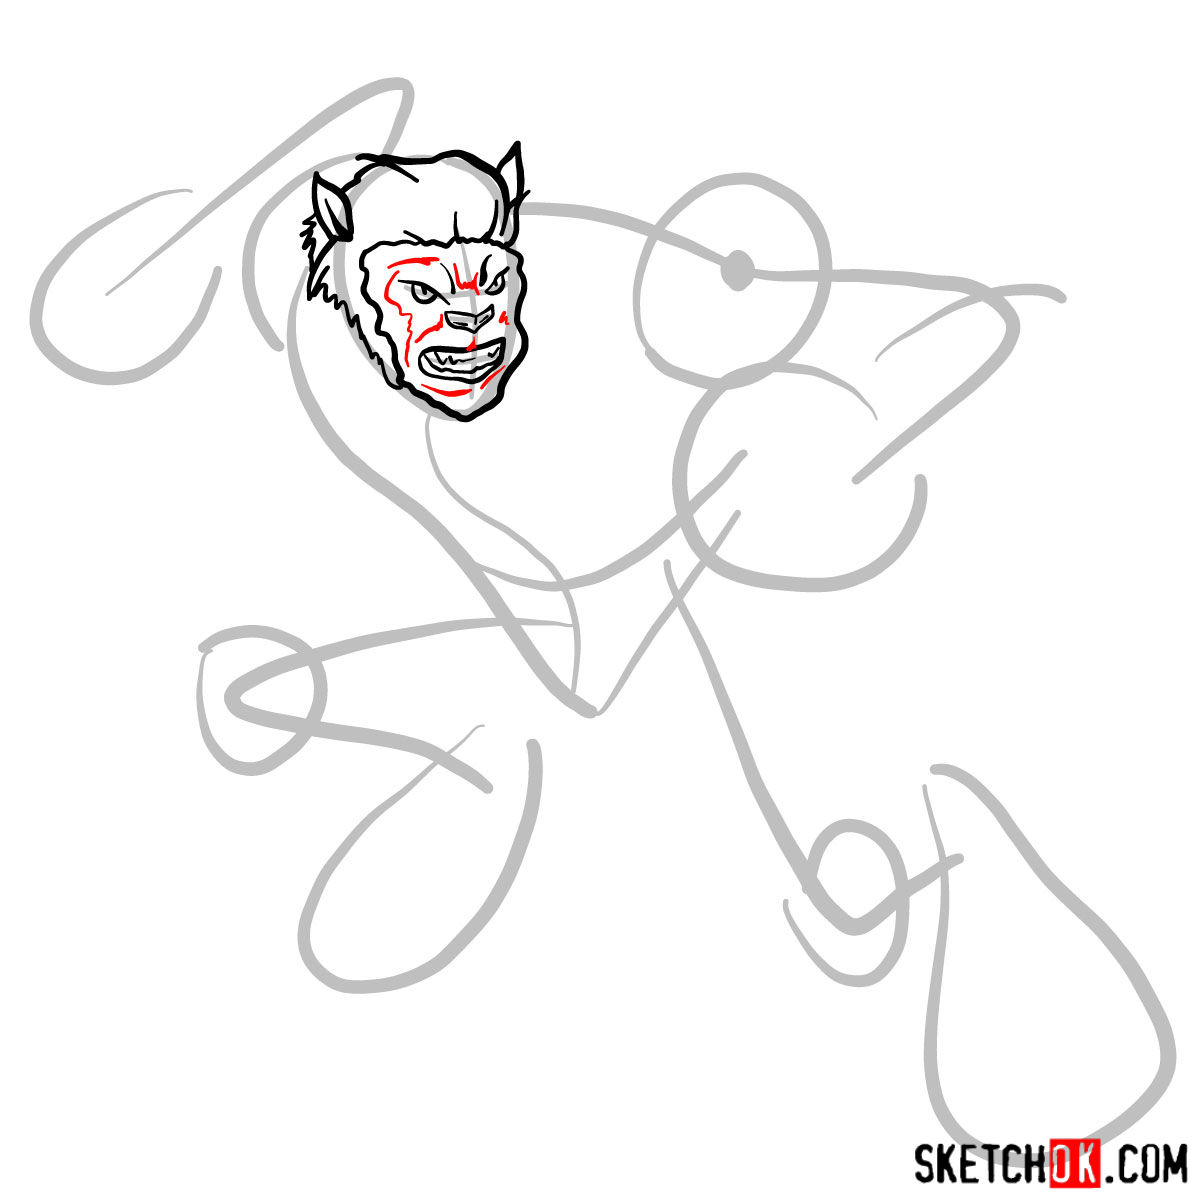 How to draw Beast (X-Men mutant) - step 04